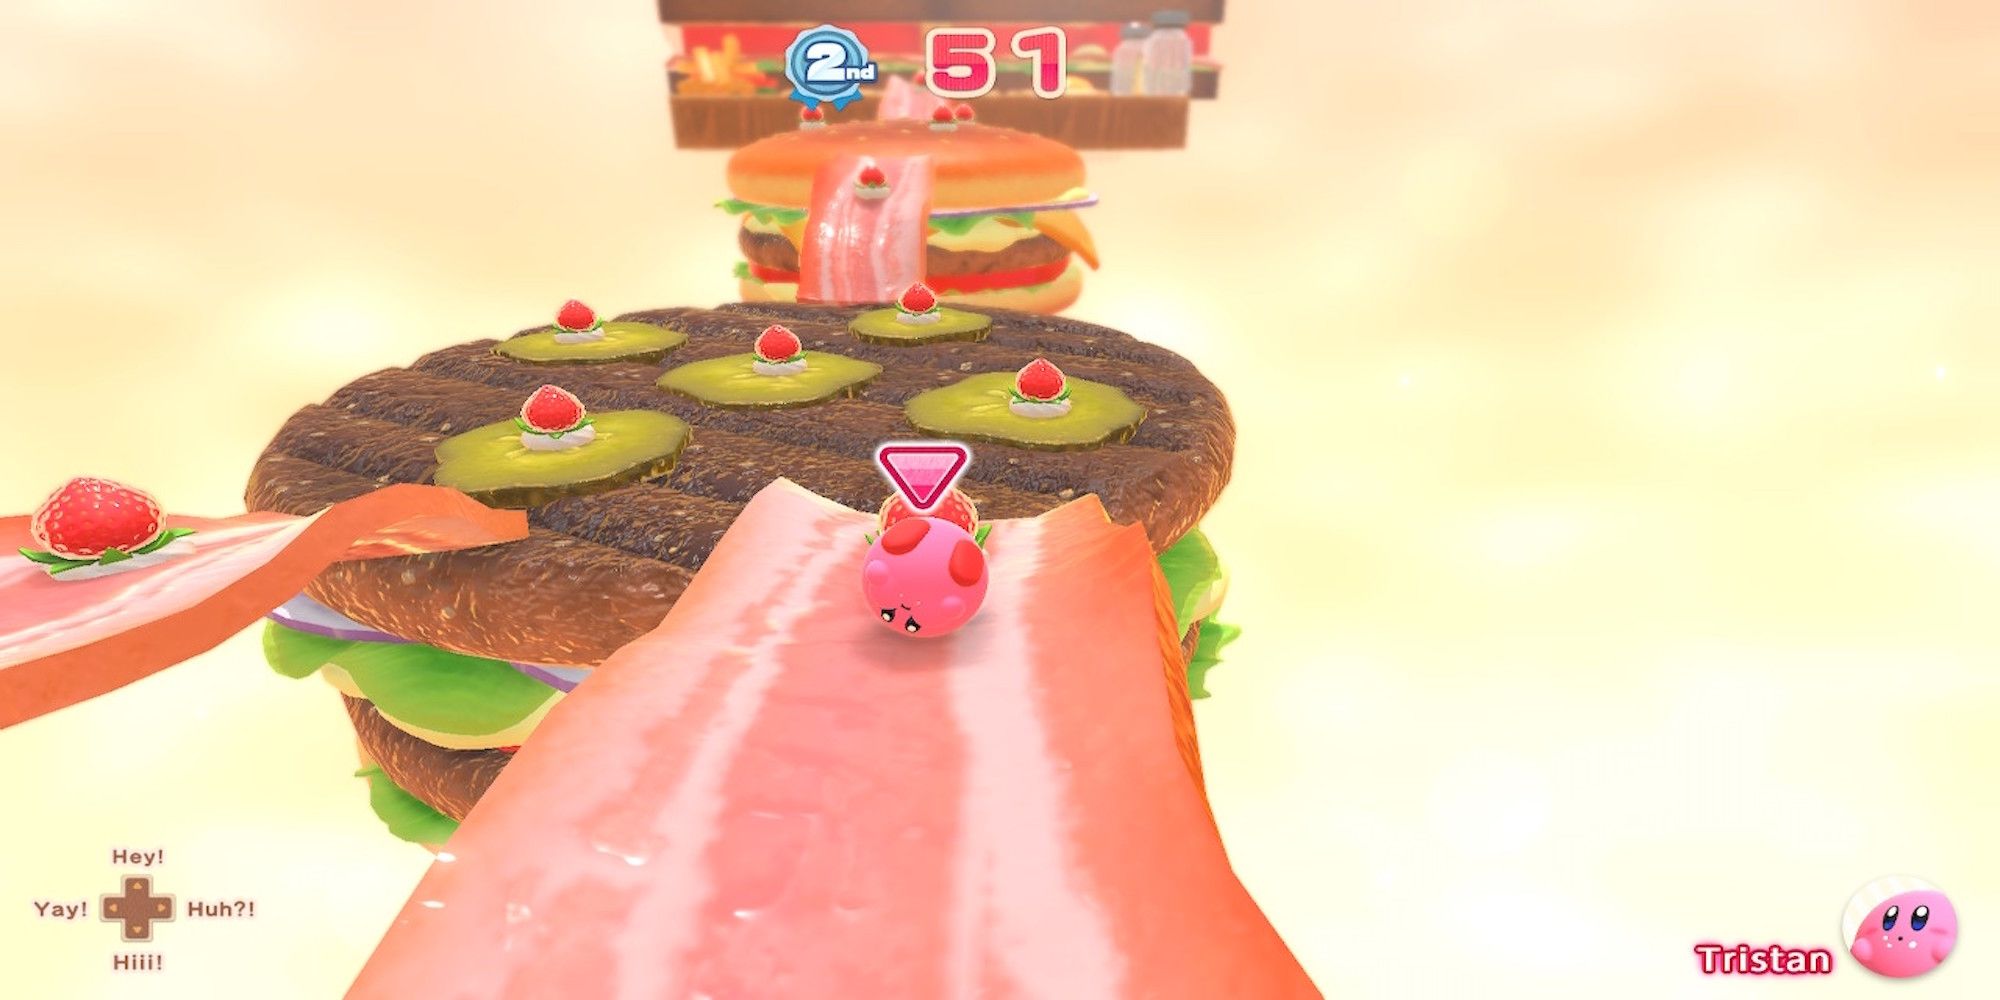 Playing a race in Kirby's Dream Buffet